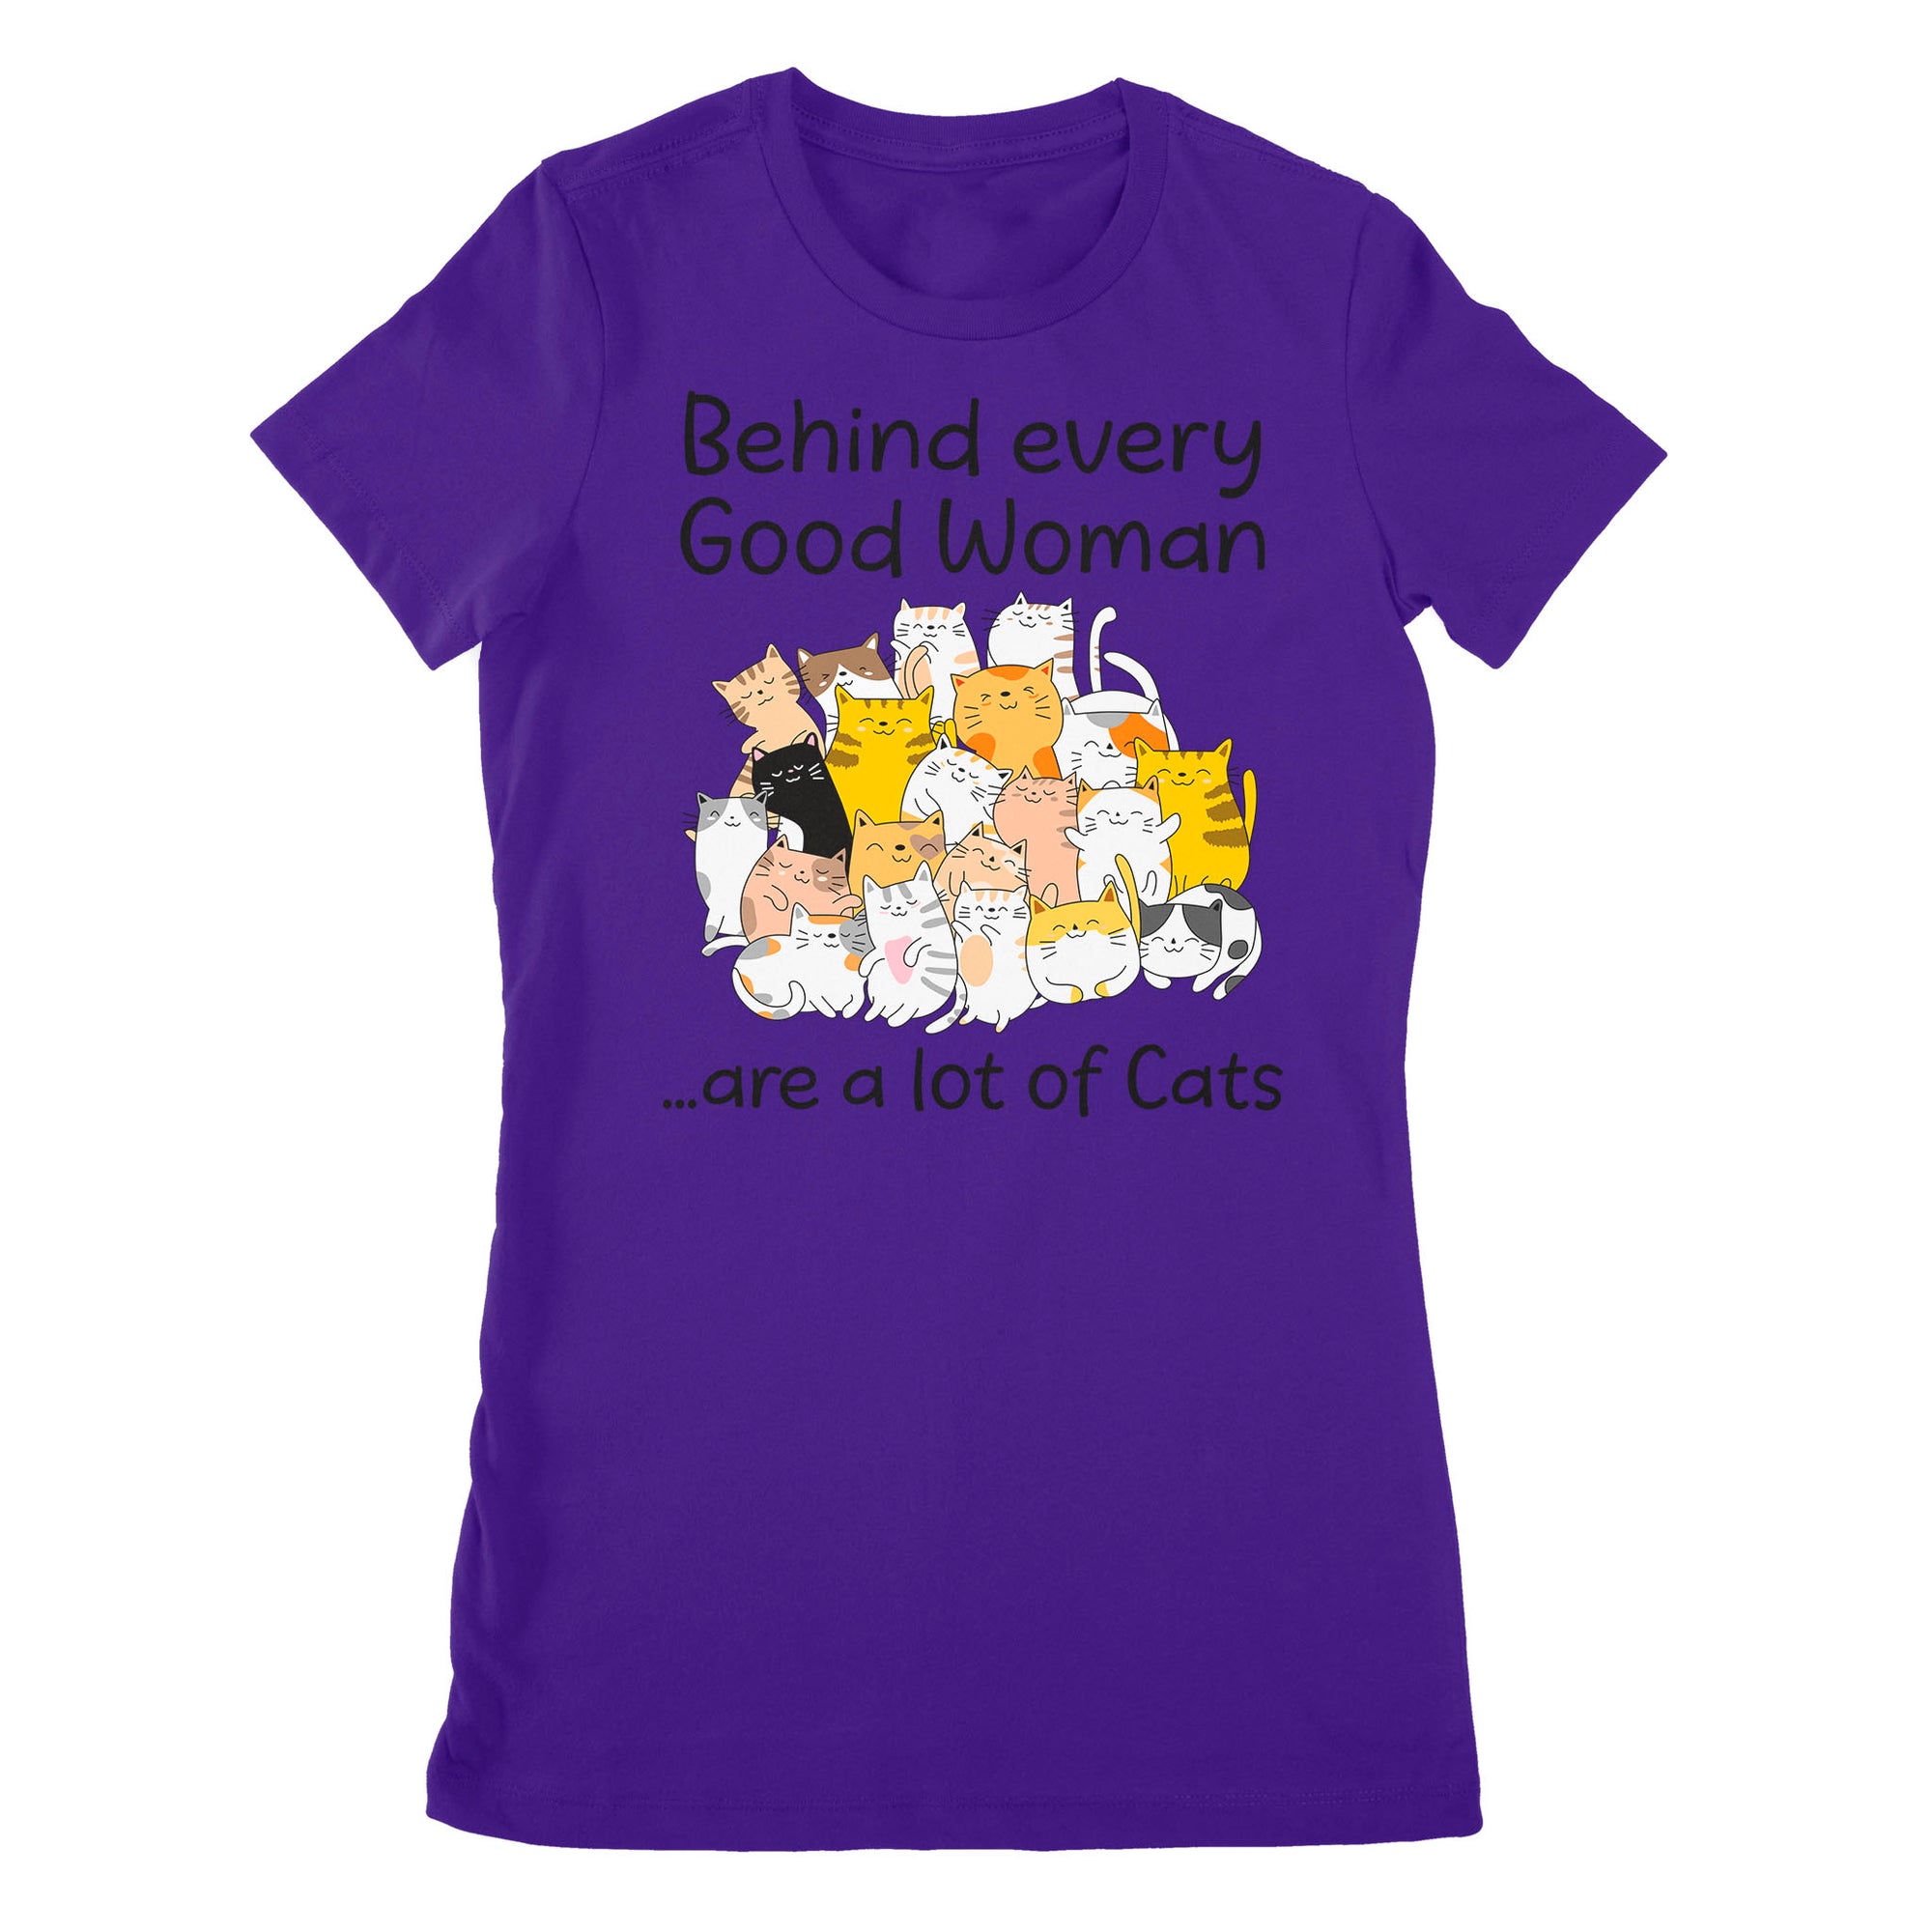 Premium Women's T-shirt - Behind Every Good Woman Are A Lot Of Cats